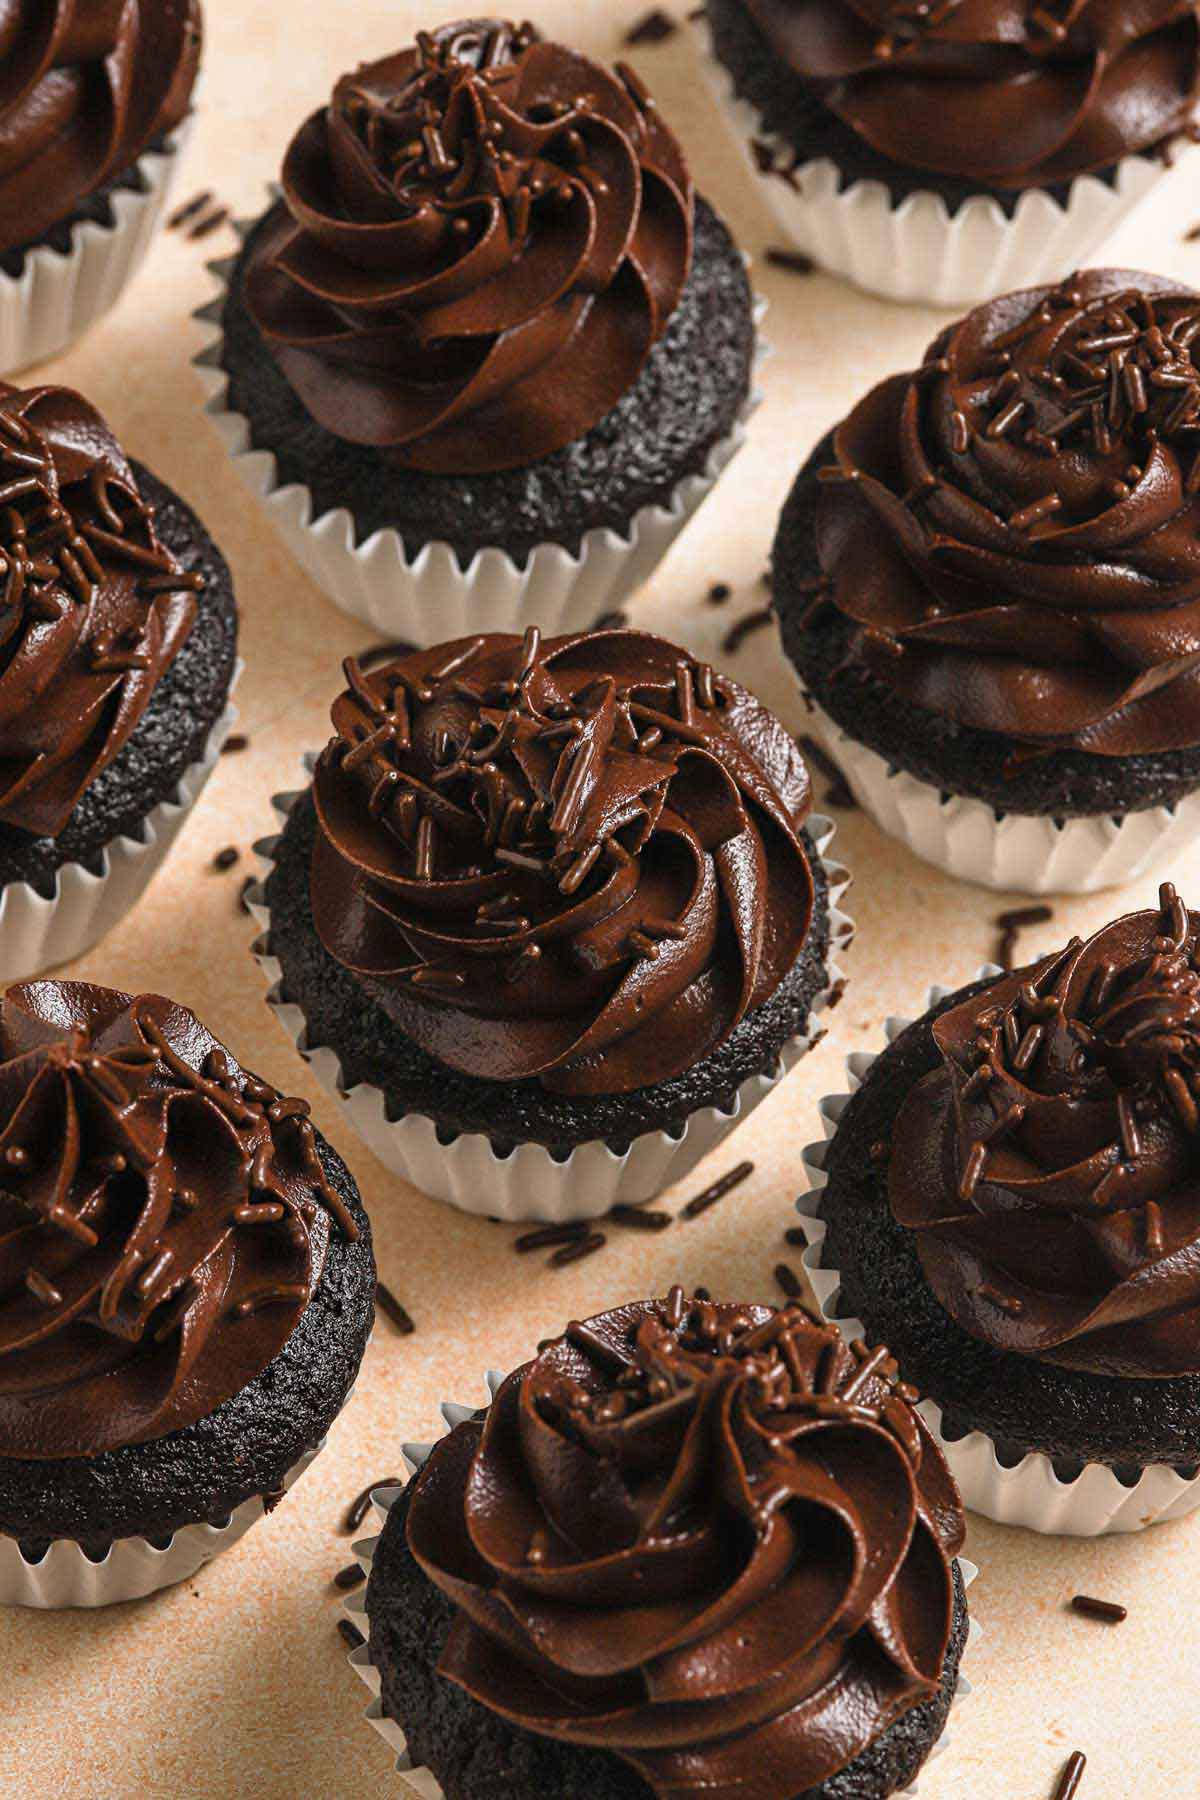 Overhead photo of chocolate cupcakes with chocolate frosting and chocolate sprinkles.